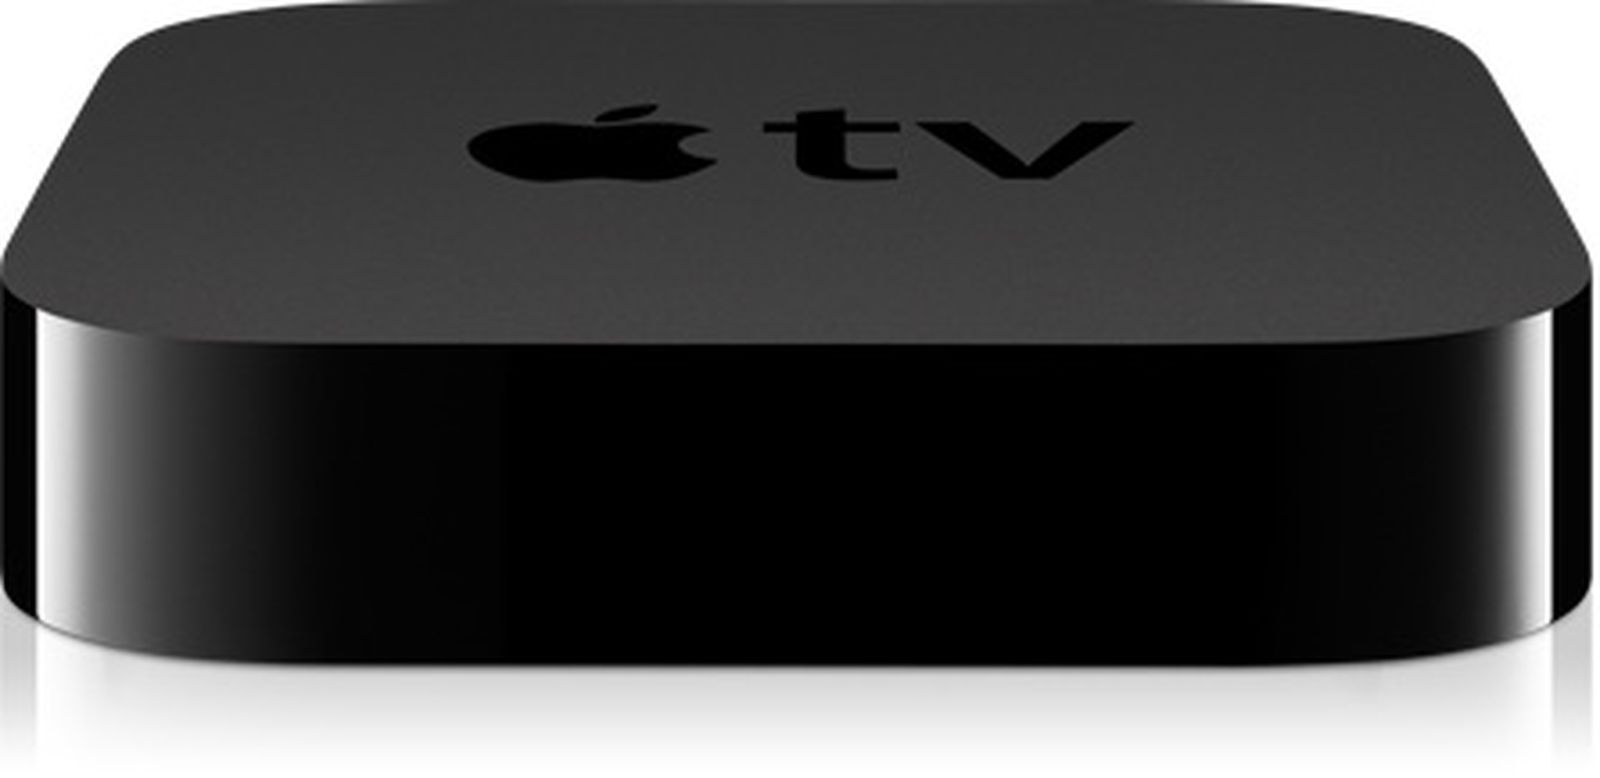 Apple Refunds Expedited Shipping Charges for New Apple TV Orders, Cites